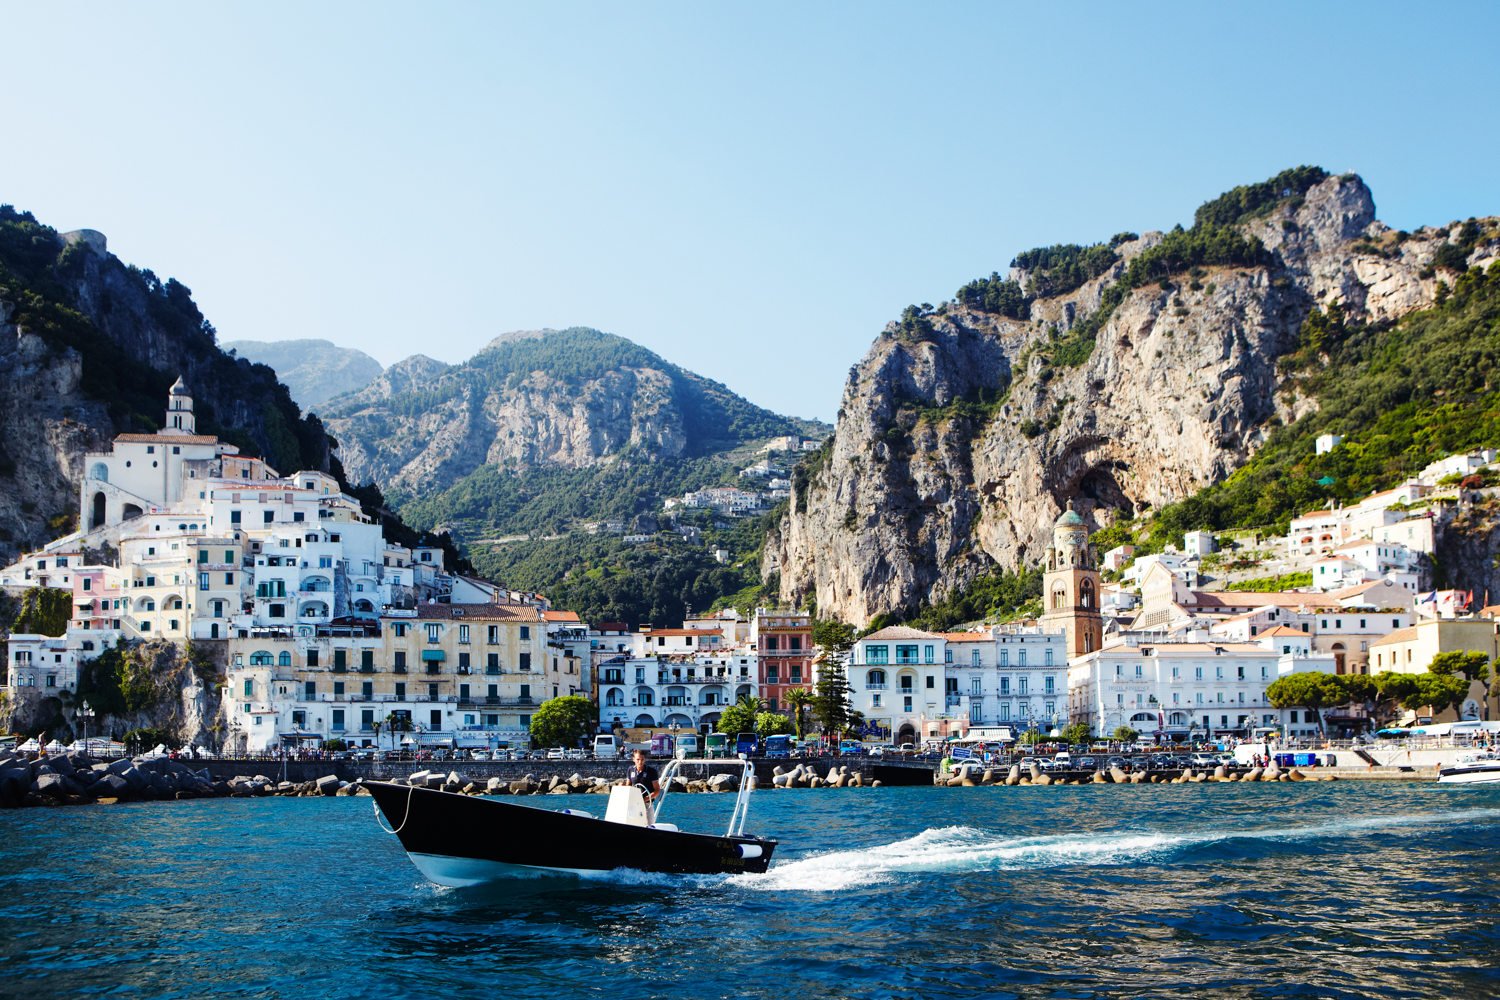 Hiring a boat is an excellent way to see the Amalfi Coast. Image by Mark Read / Lonely Planet